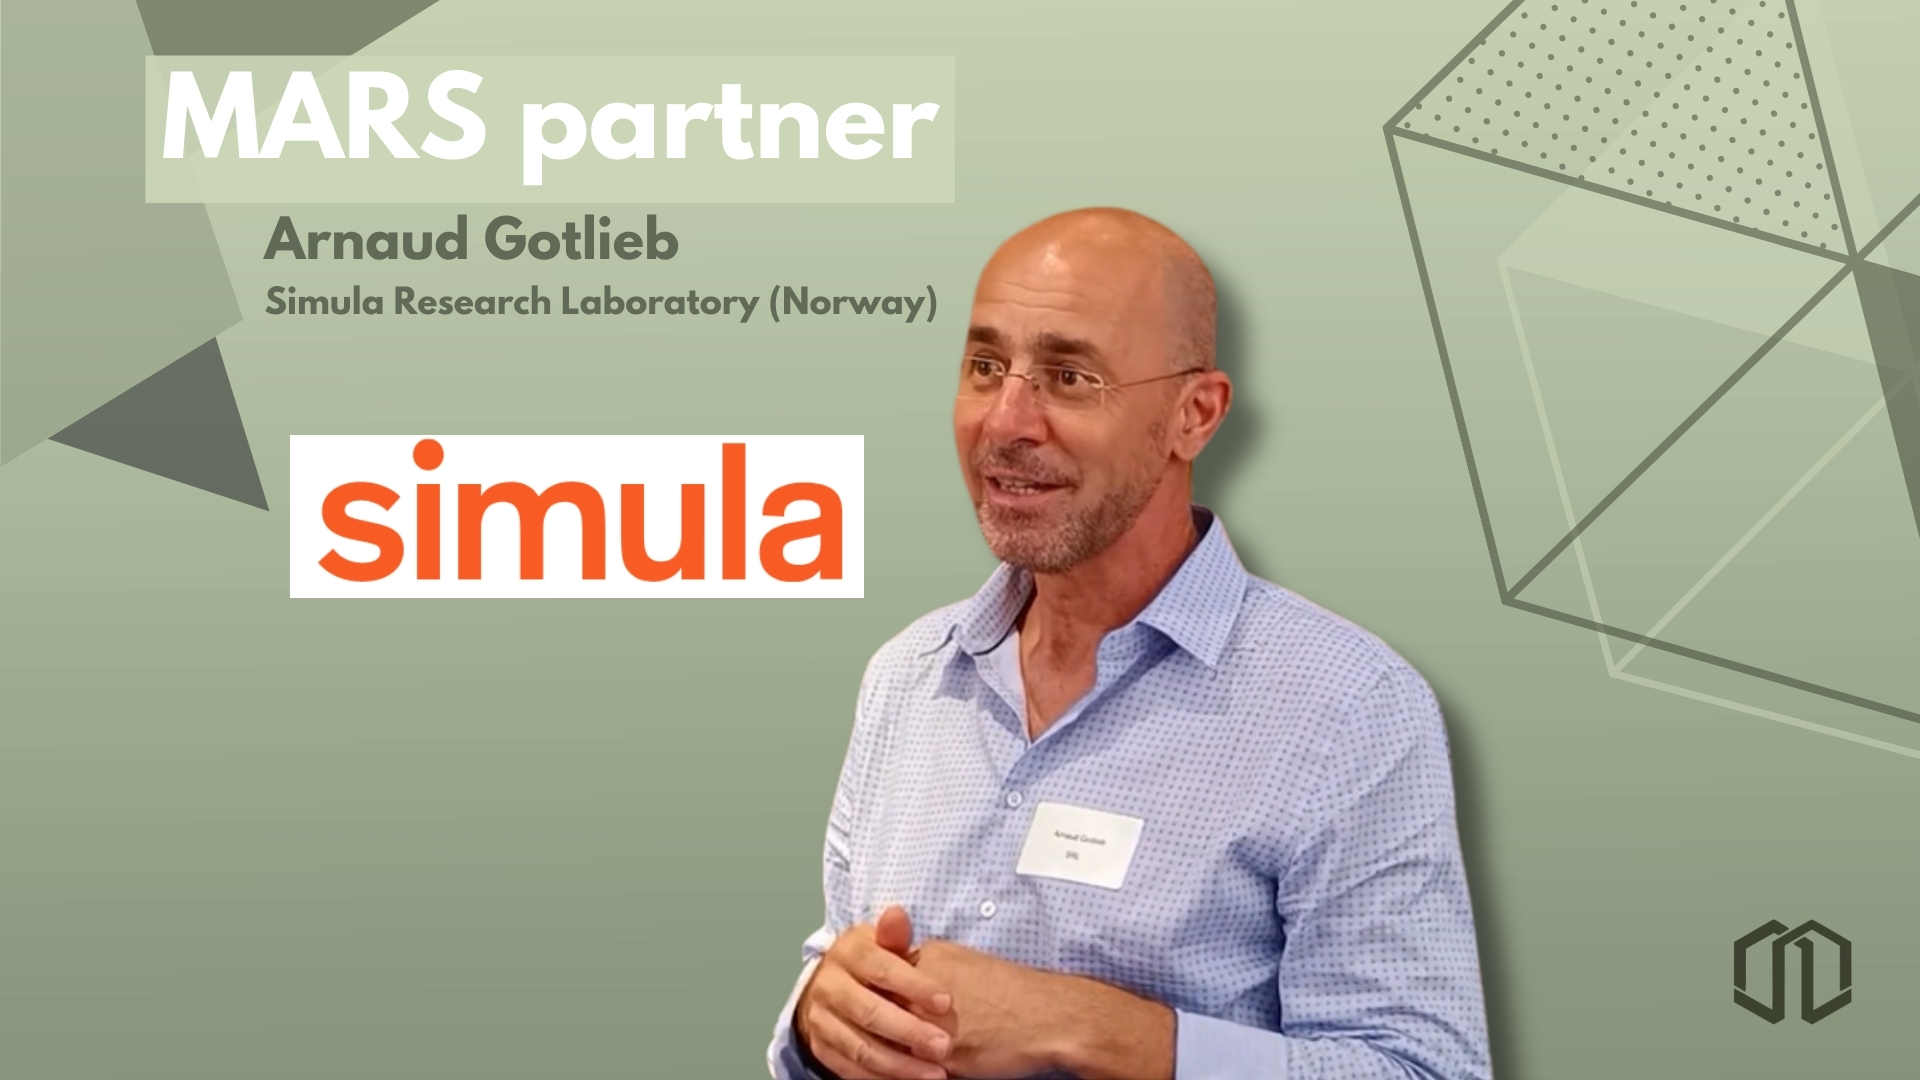 Meet our partner: Video Interview with Arnaud Gottlieb (Simula)